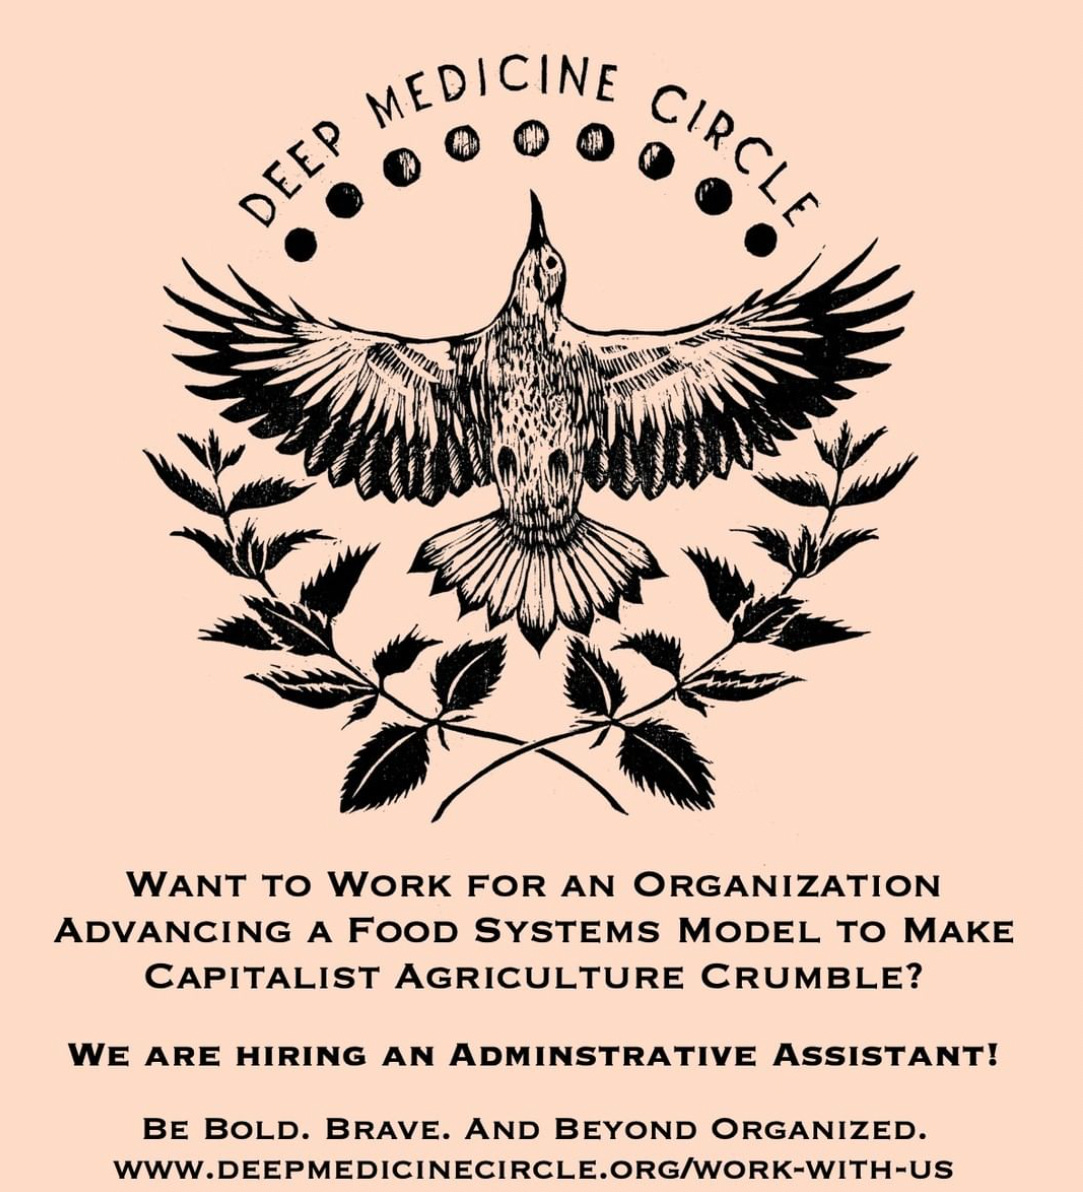 A logo features a bird flying straight up, under the phases of the moon, above 2 plant stems with leaves. Deep Medicine Circle. Want to work for an organization advancing a food systems model to make capitalist agriculture crumble? We are hiring an administrative assistant. Be bold. Brave. And beyond organized. www.deepmedicinecircle.org/work-with-us